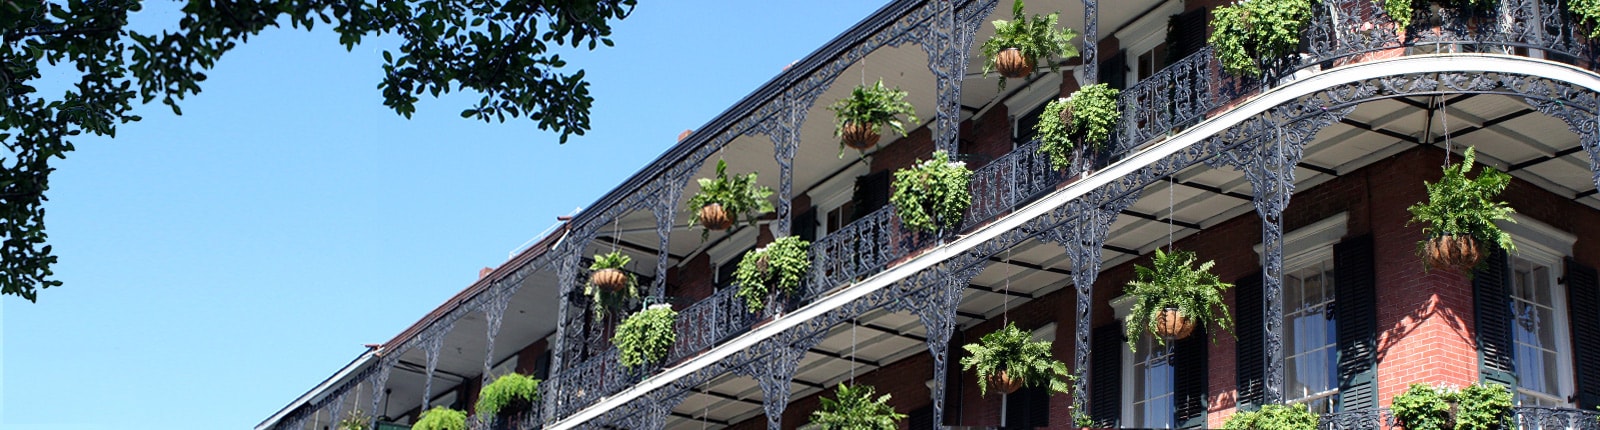 balconies on a building in New Orleans